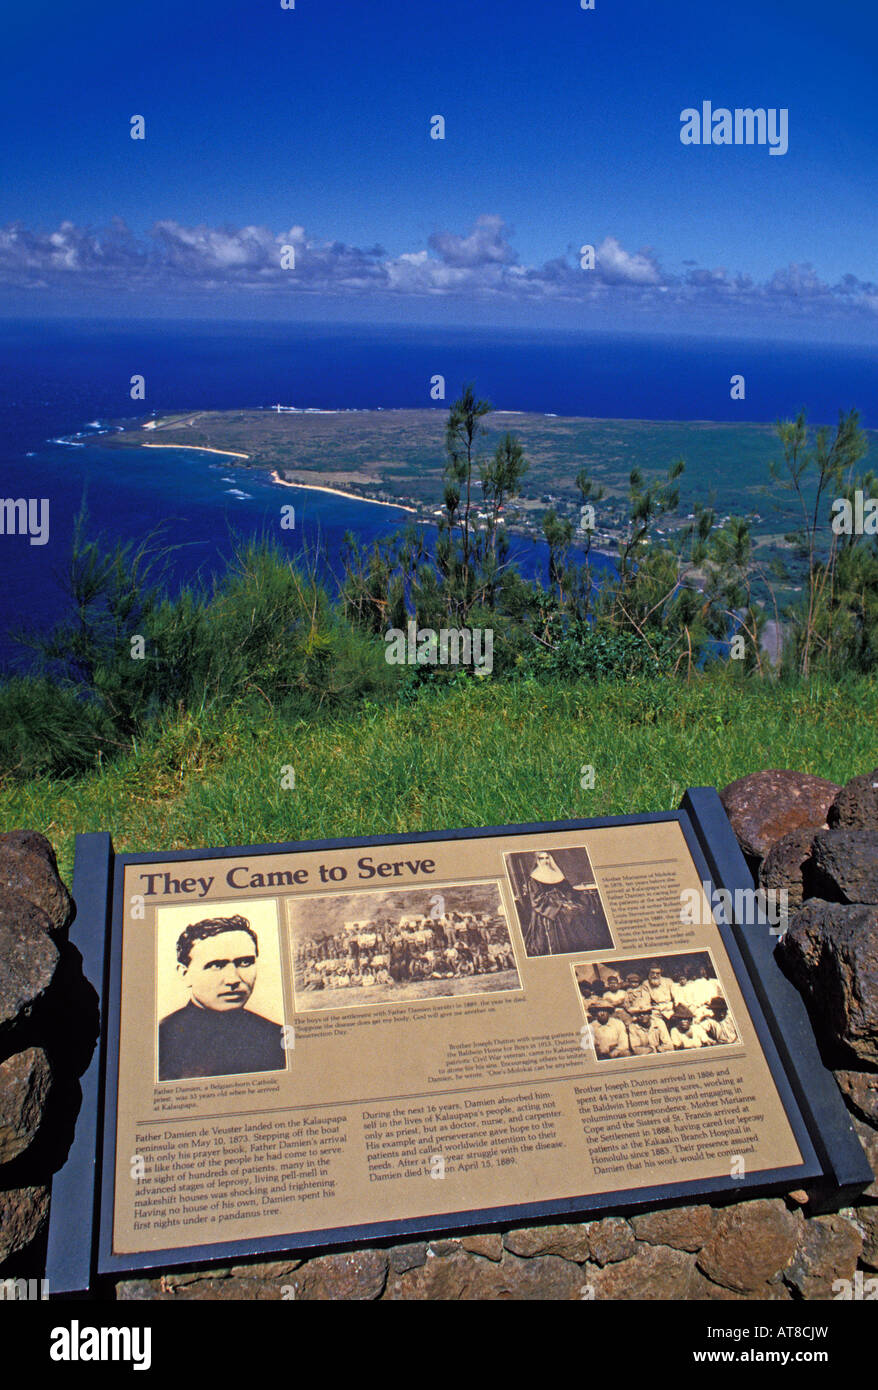 View of Kalaupapa peninsula on Molokai with historic plaque commemorating the missionaries who served the leper colony. Stock Photo